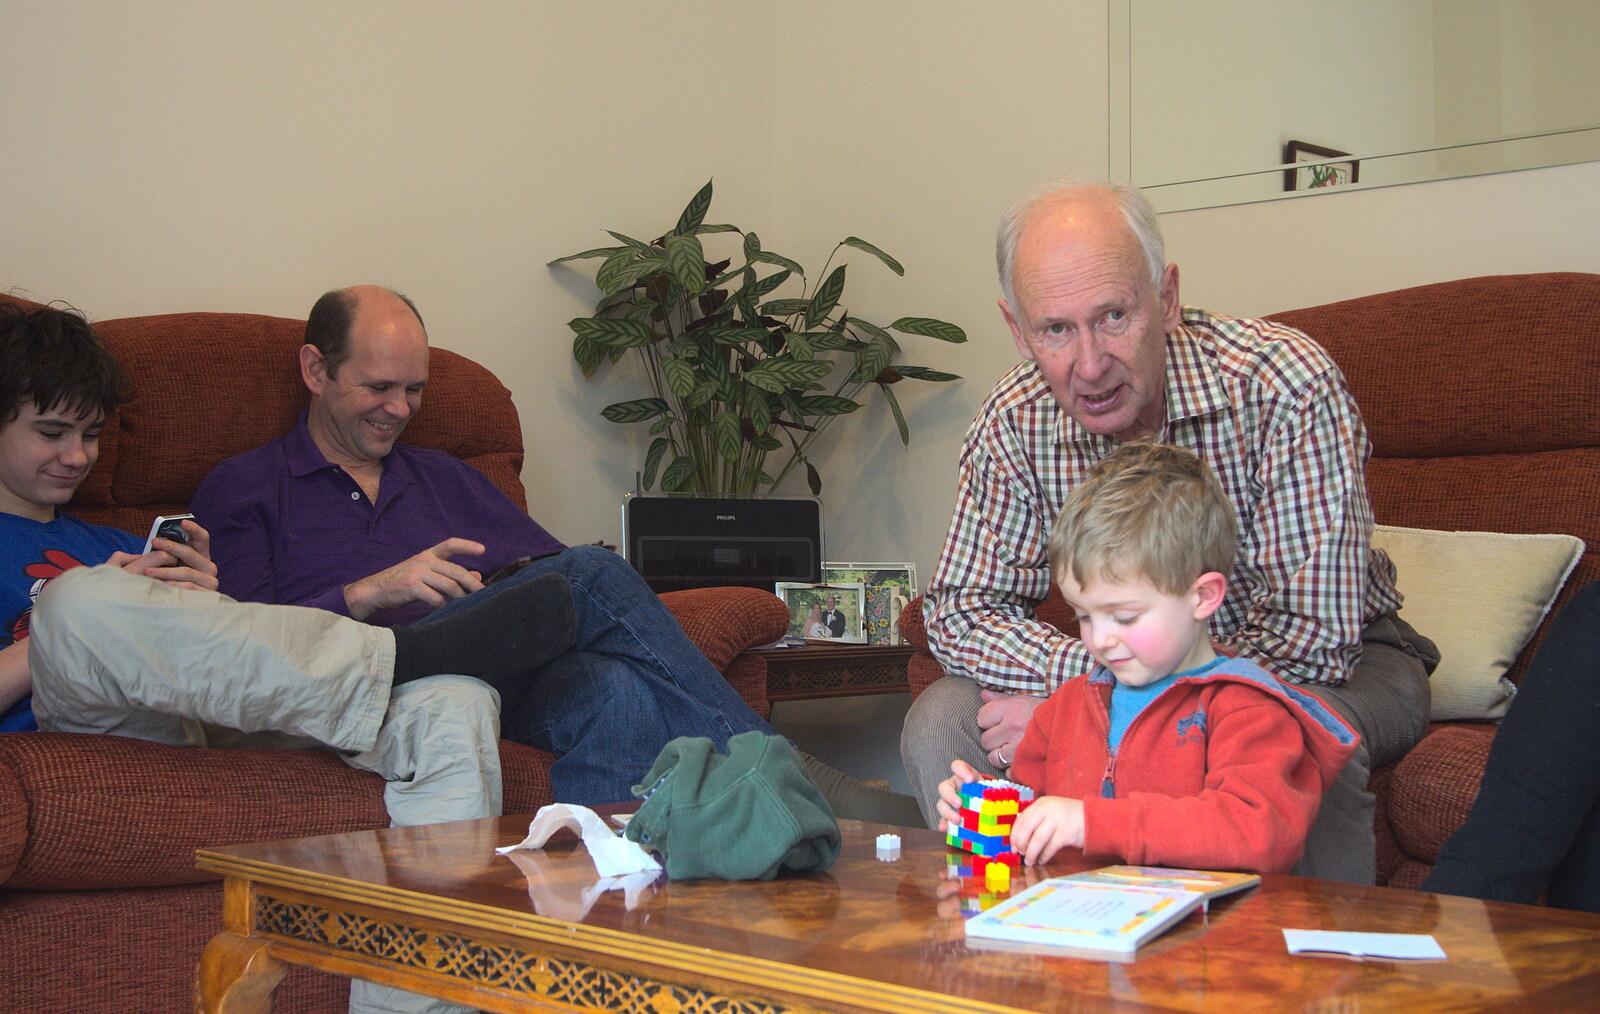 Fred plays with Lego as Bob looks on from A Trip to Highcliffe Castle, Highcliffe, Dorset - 18th March 2013